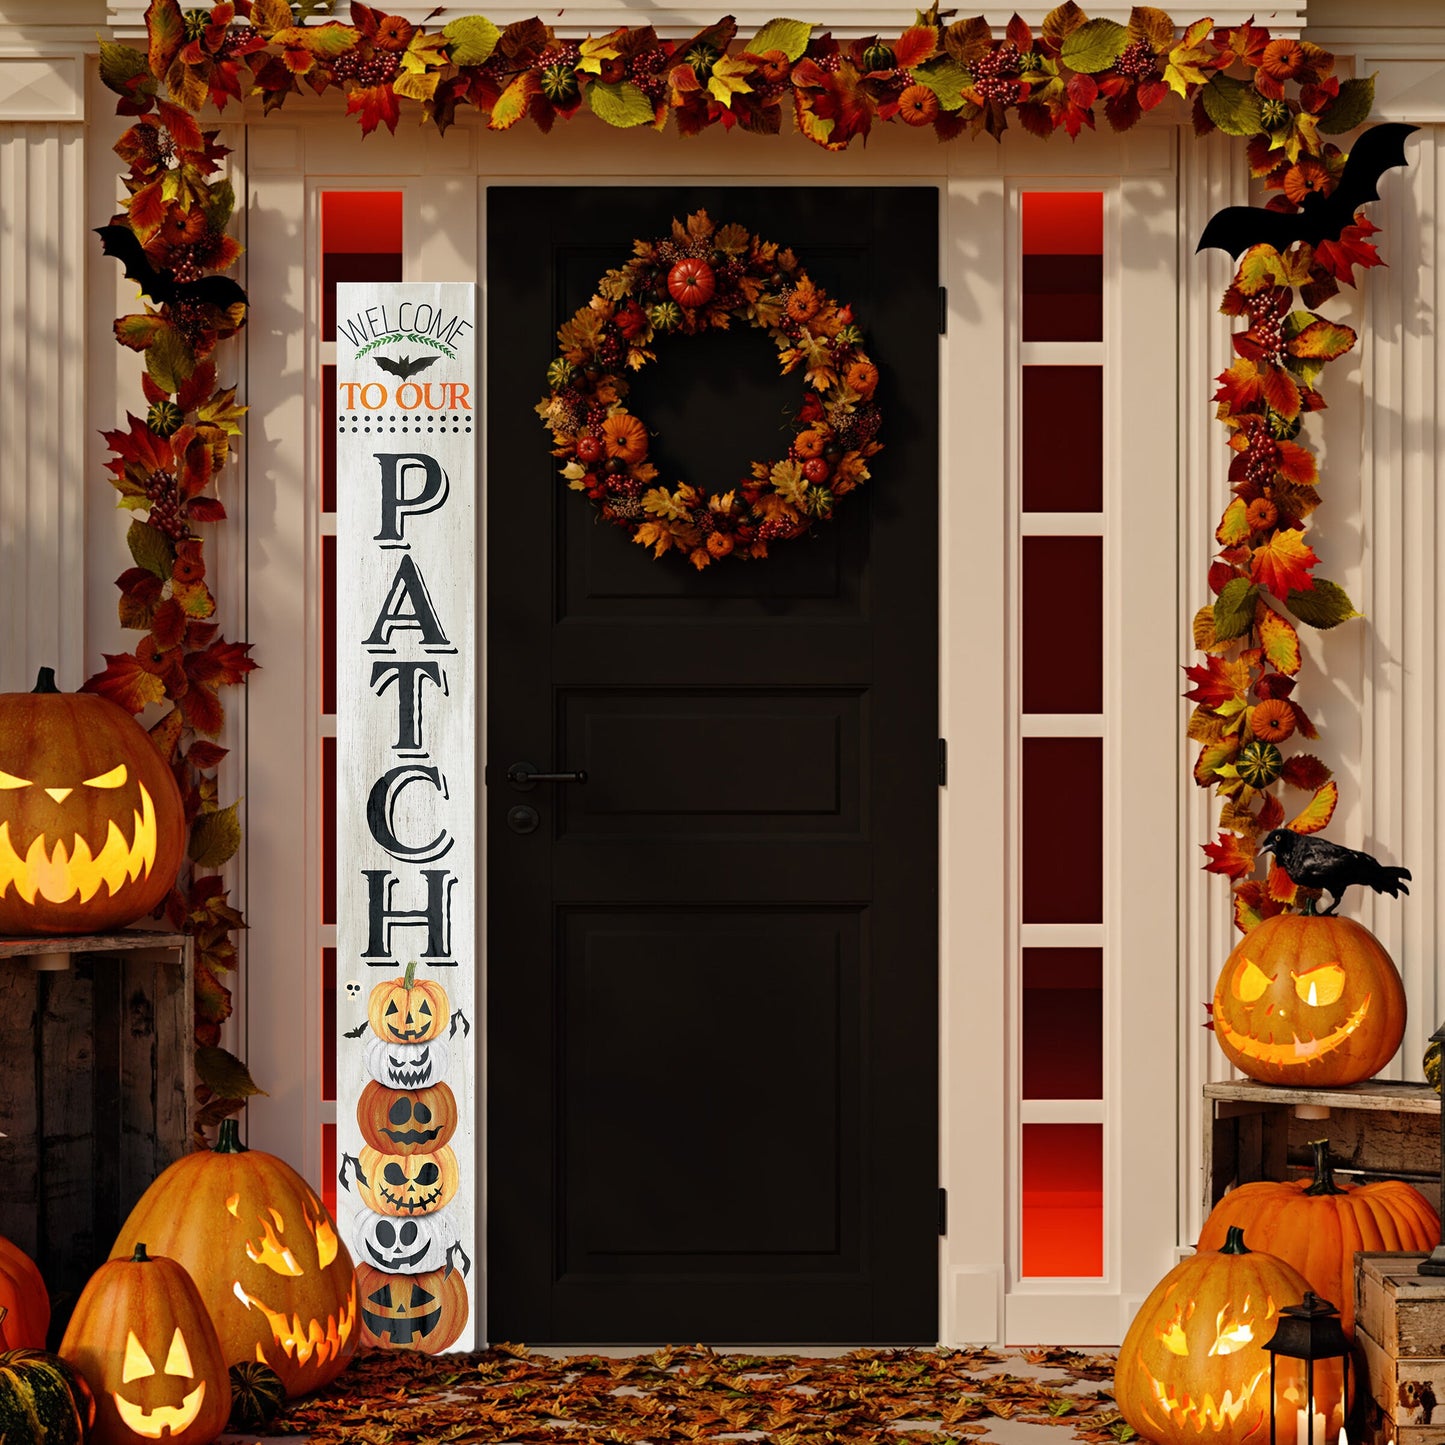 72in Wooden "Welcome to Our Patch" Halloween Porch Sign - Spooky and Charming Front Door Decor for Halloween Celebrations